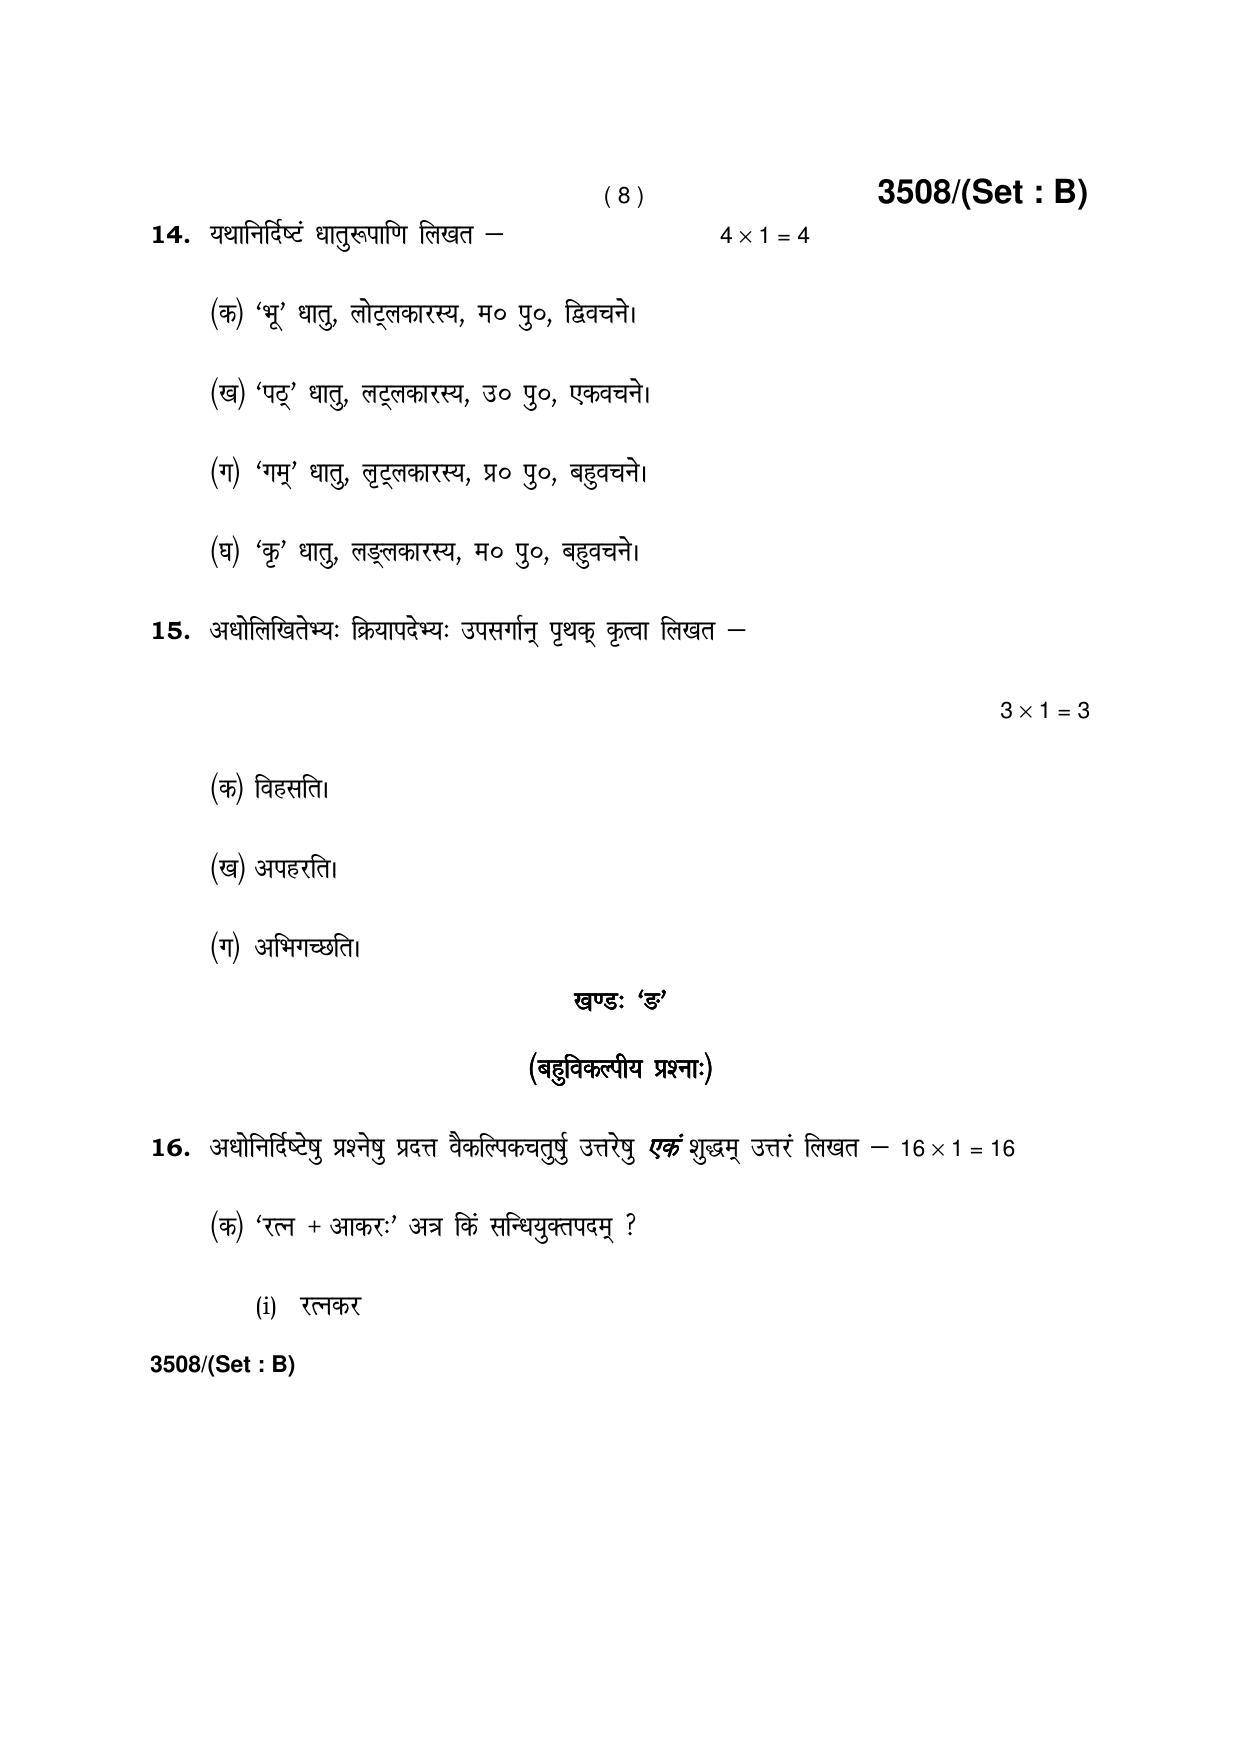 Haryana Board HBSE Class 10 Sanskrit -B 2018 Question Paper - Page 8